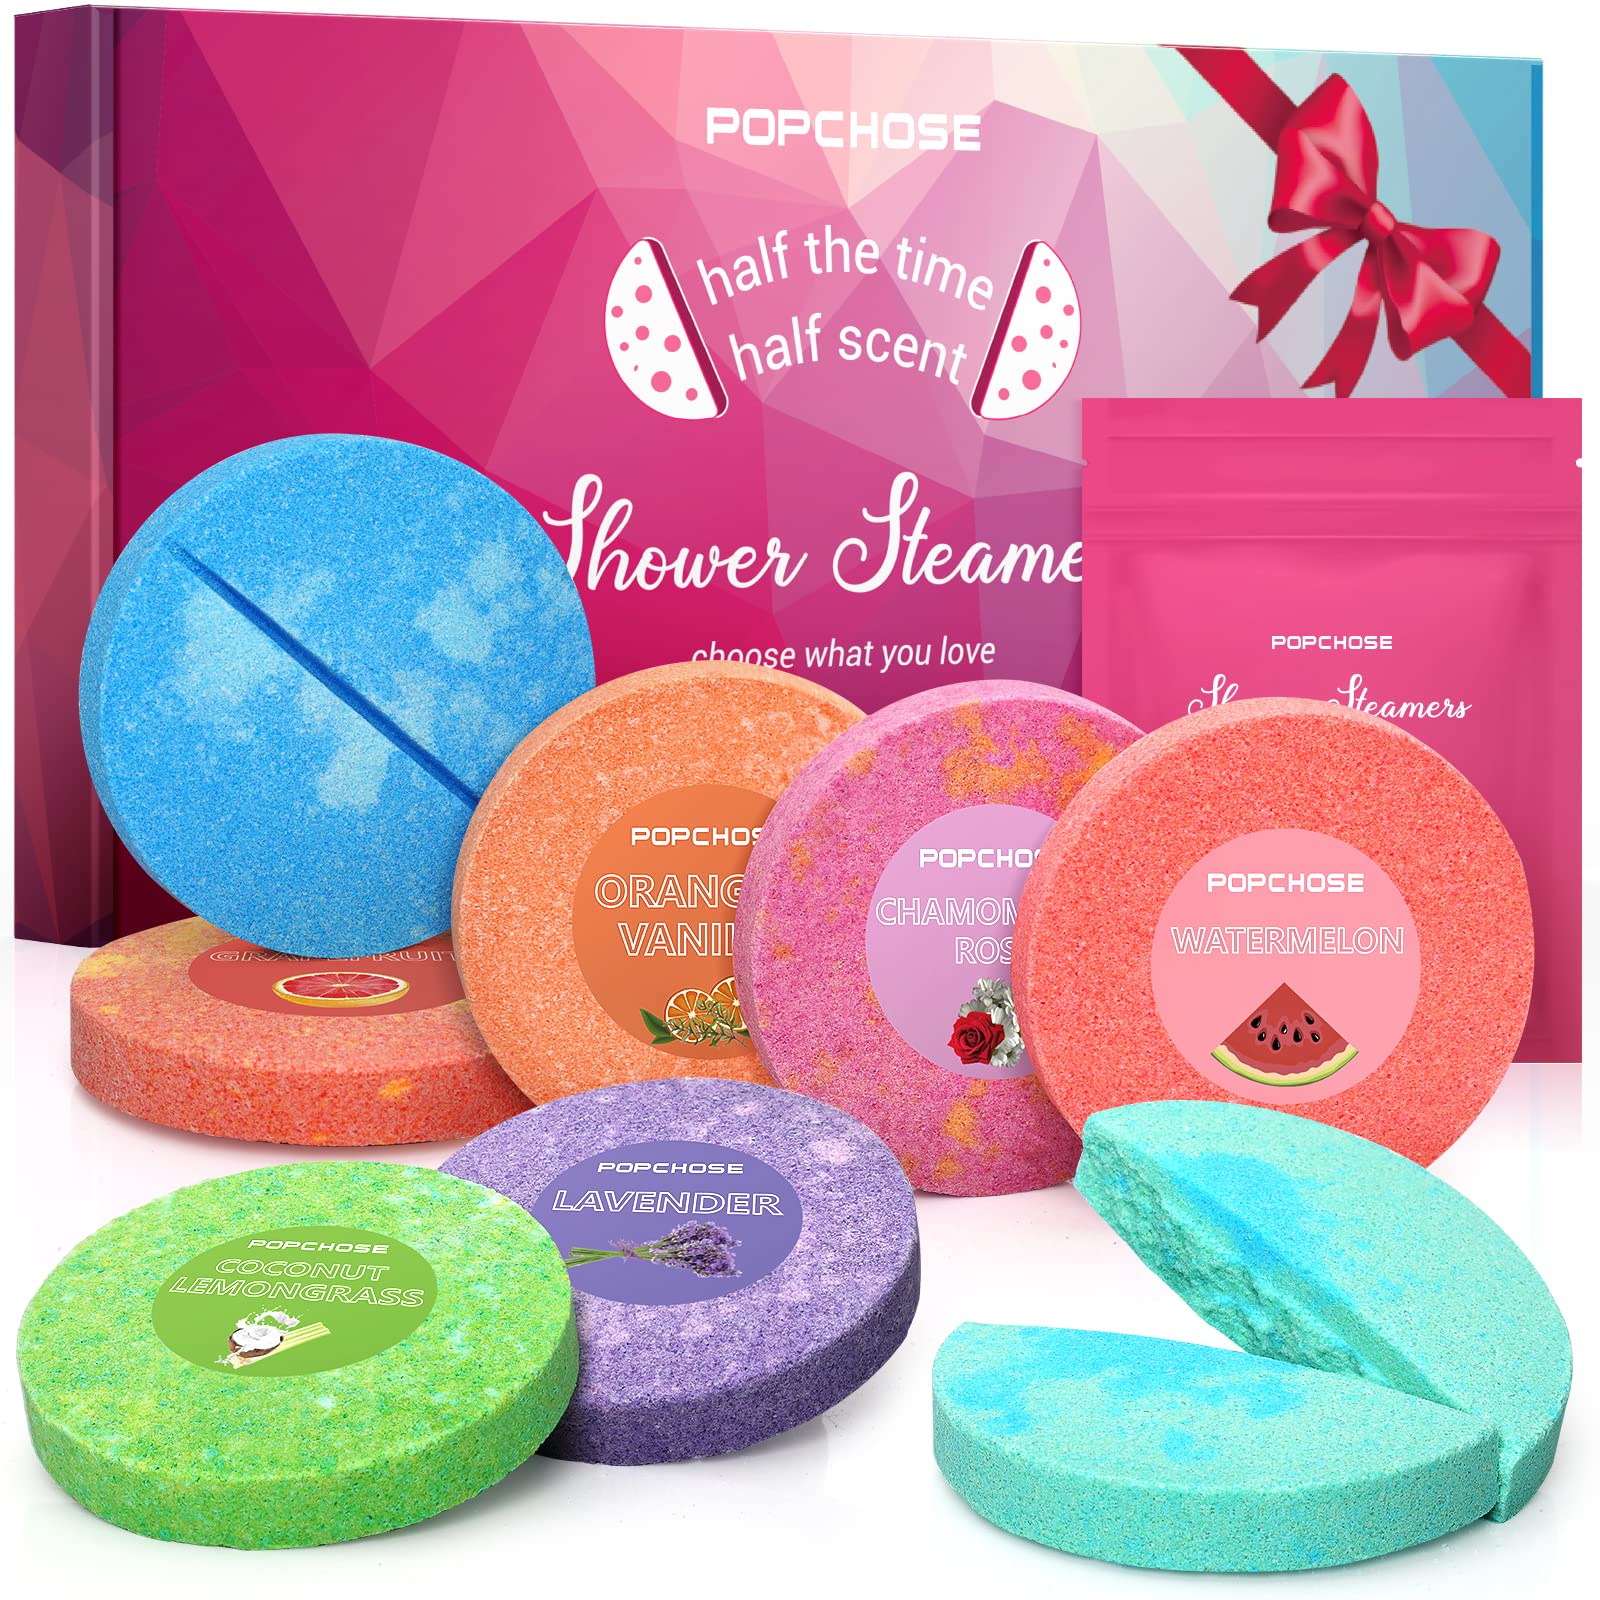  Shower Steamers Aromatherapy Christmas Gifts Stocking Stuffers  for Women 8 PCS, BLRIET Shower Bombs Birthday Gift for Mom with Lavender  Natural Essential Oils, Self Care & Relaxation Gifts for Lover 